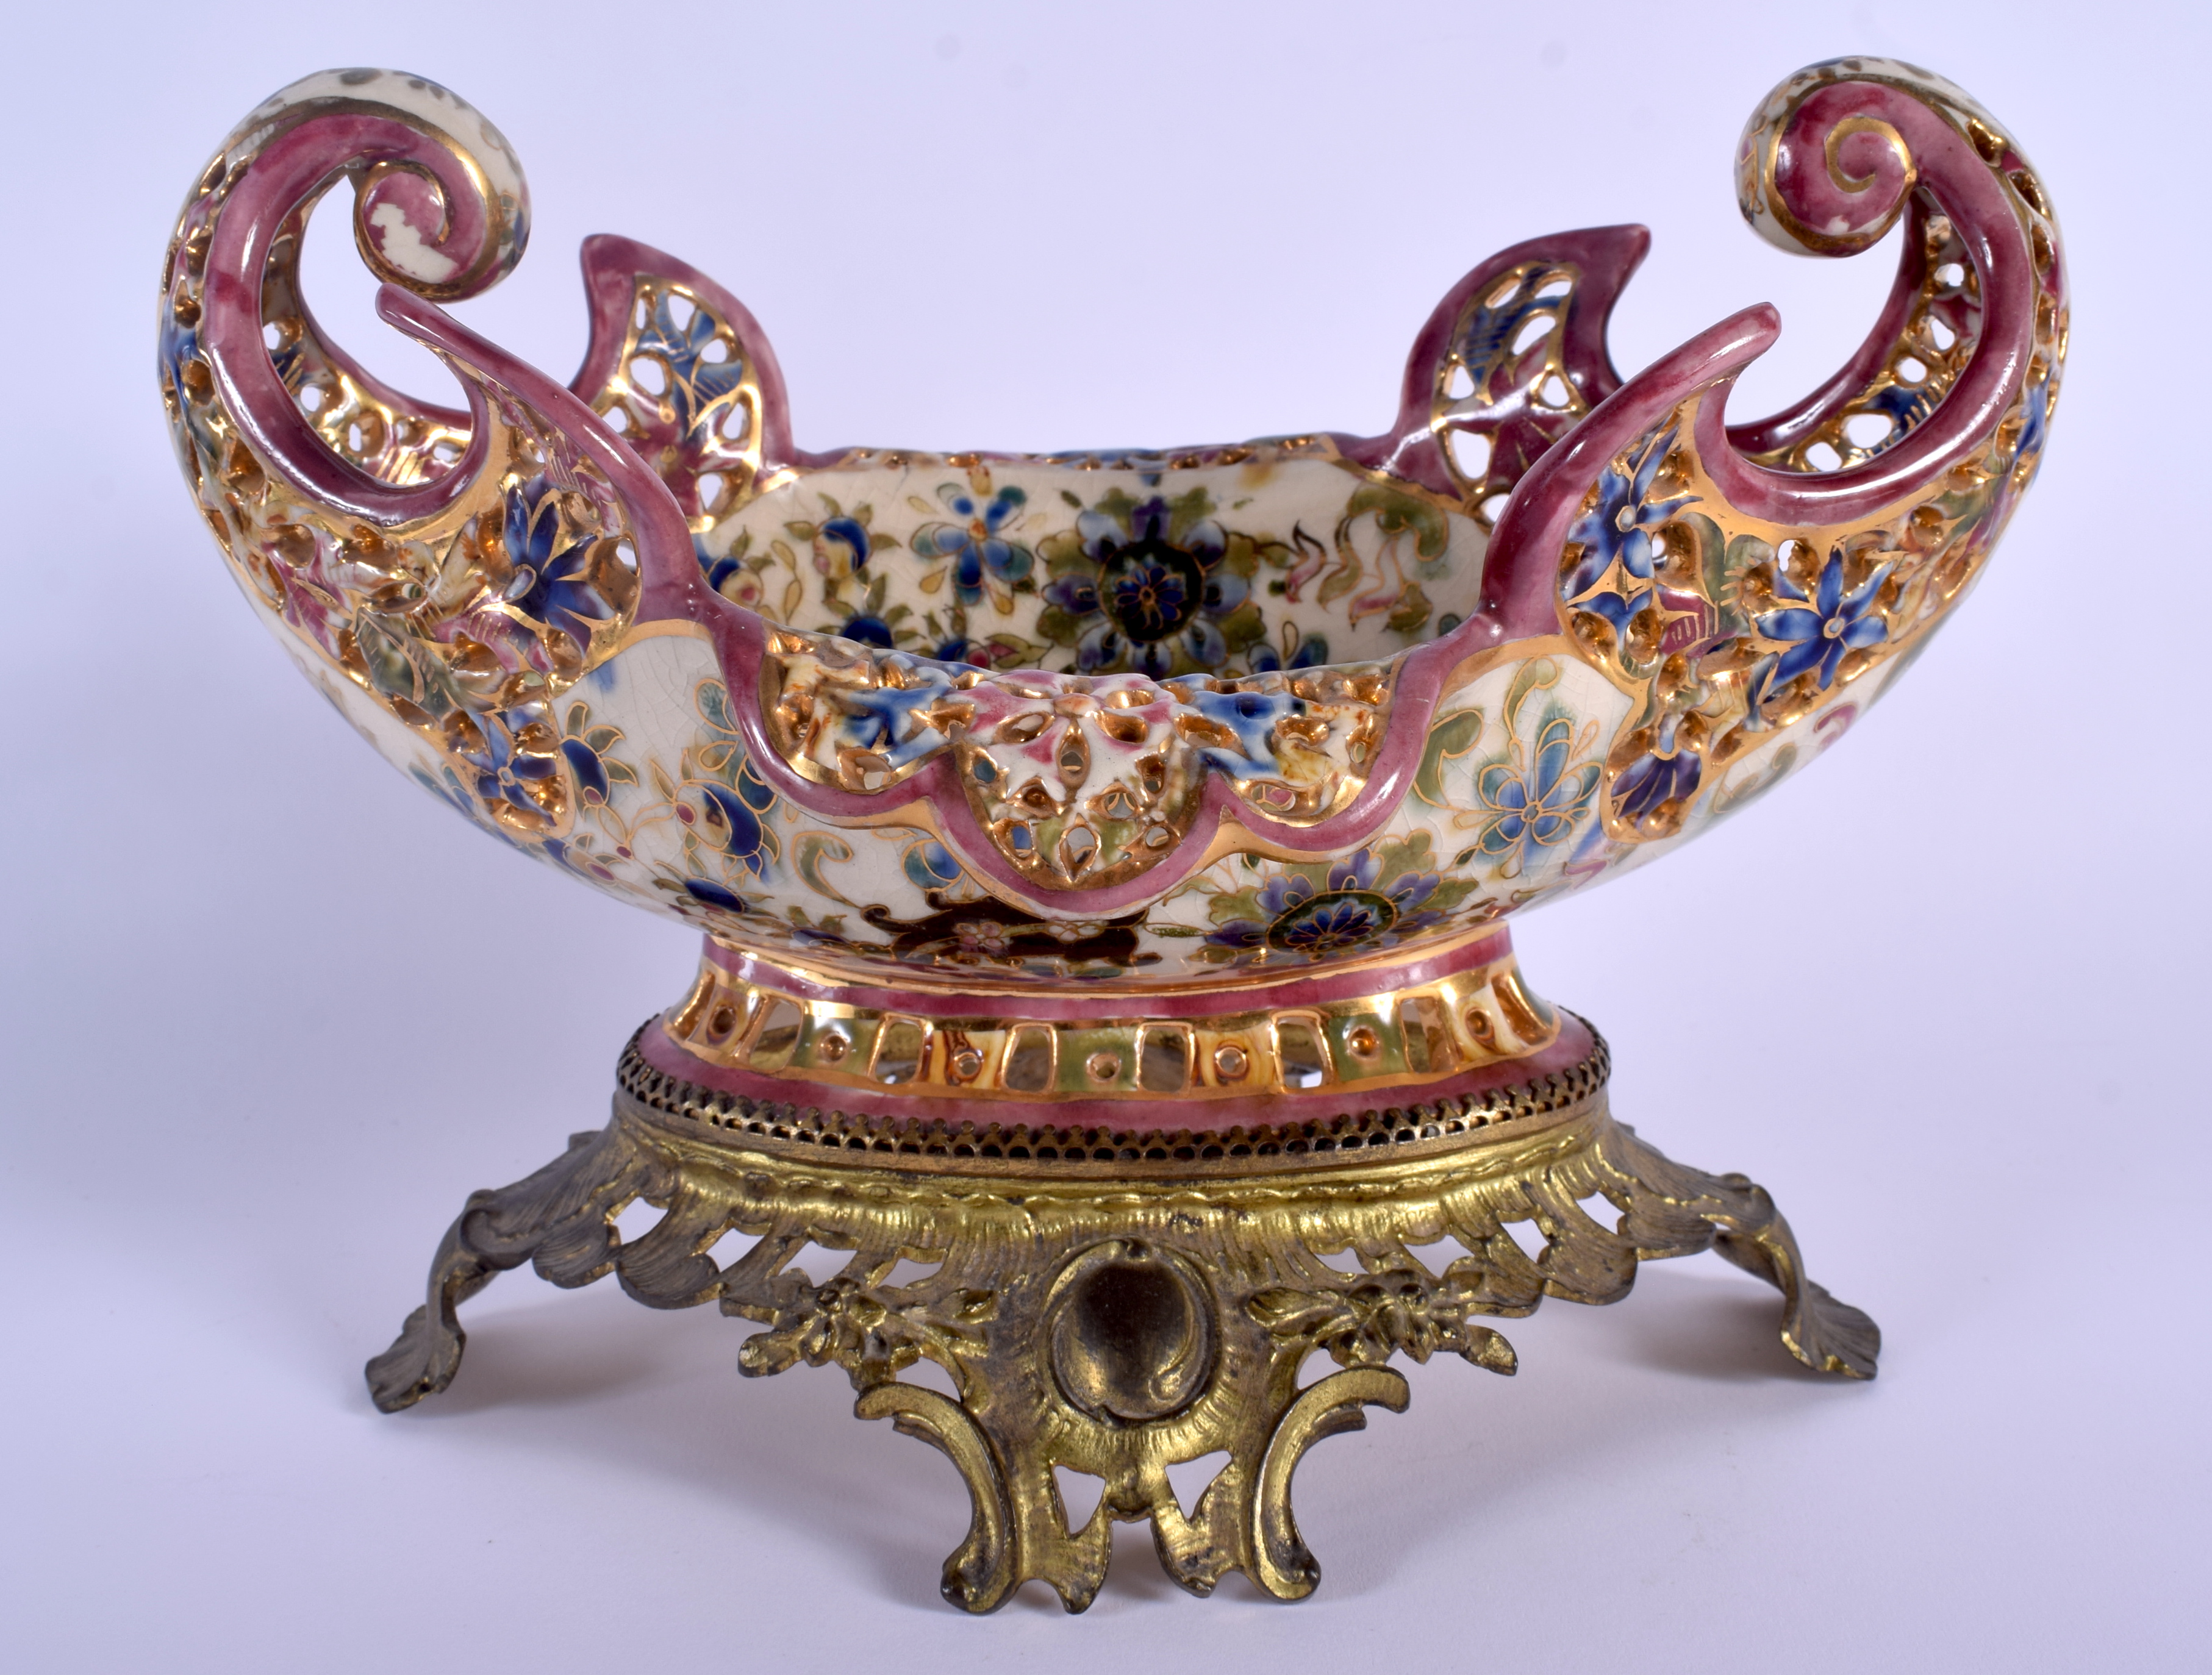 A 19TH CENTURY HUNGARIAN FISCHER POTTERY BOWL upon a gilt metal base. 24 cm x 18 cm.